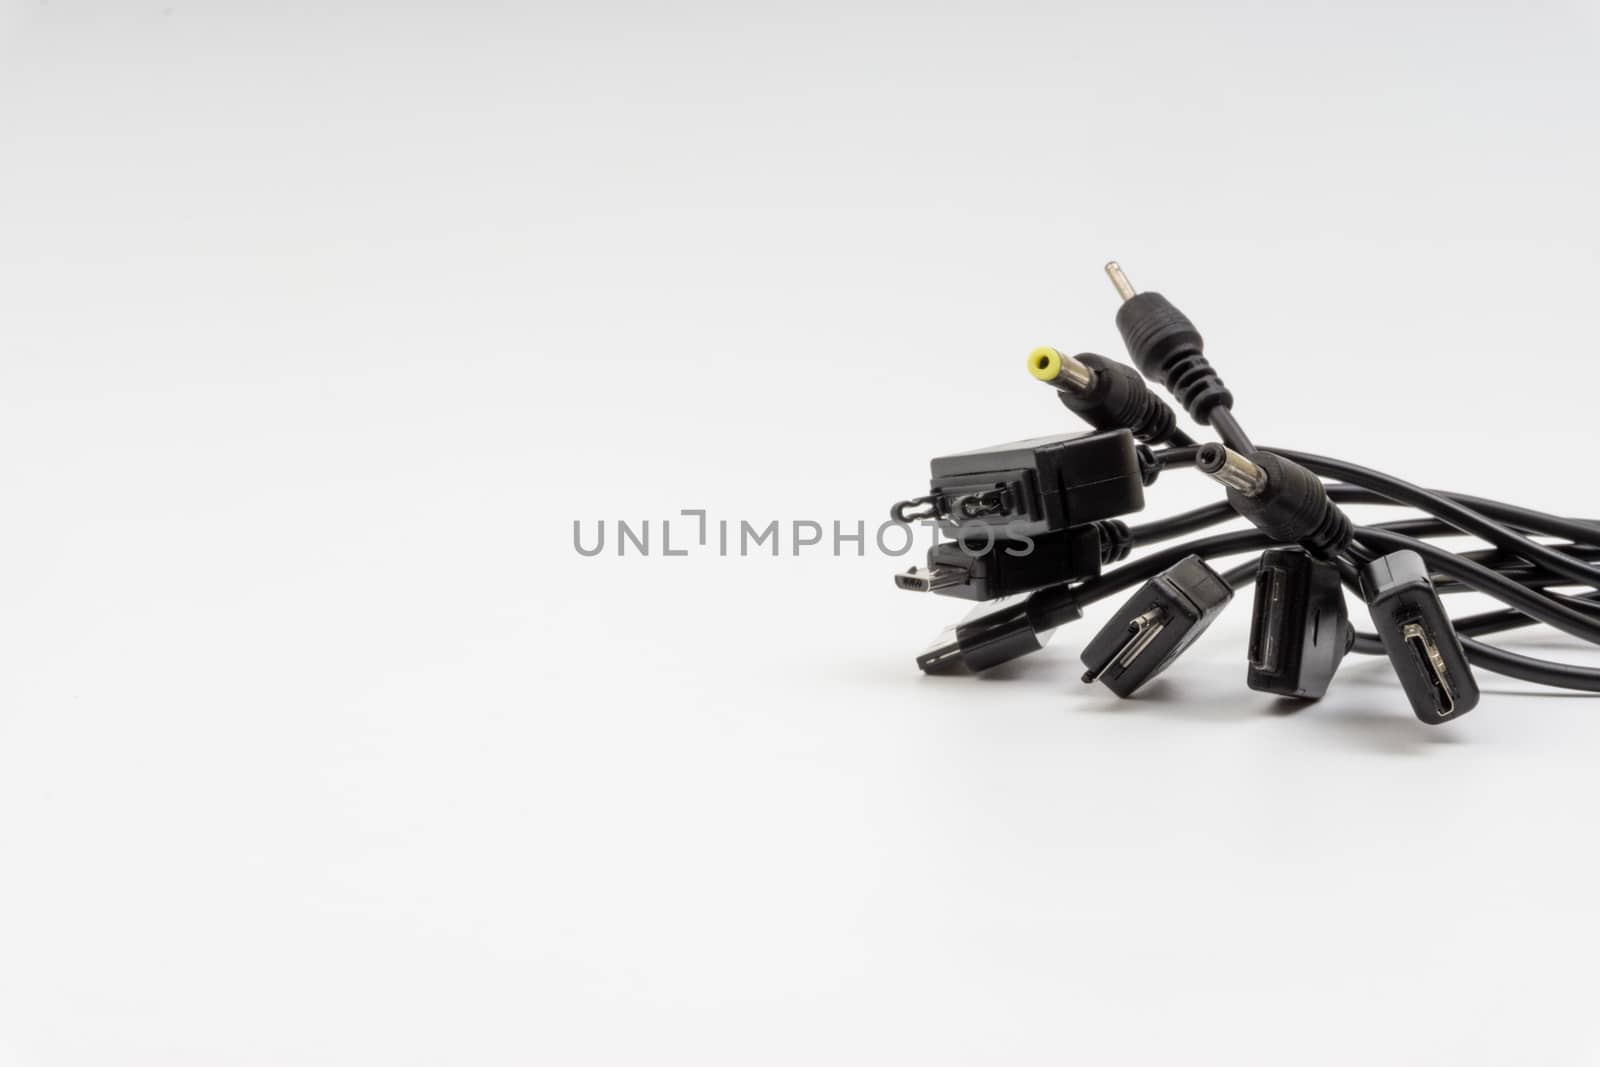 Universal recharger head or usb cable isolated on white background by silverwings